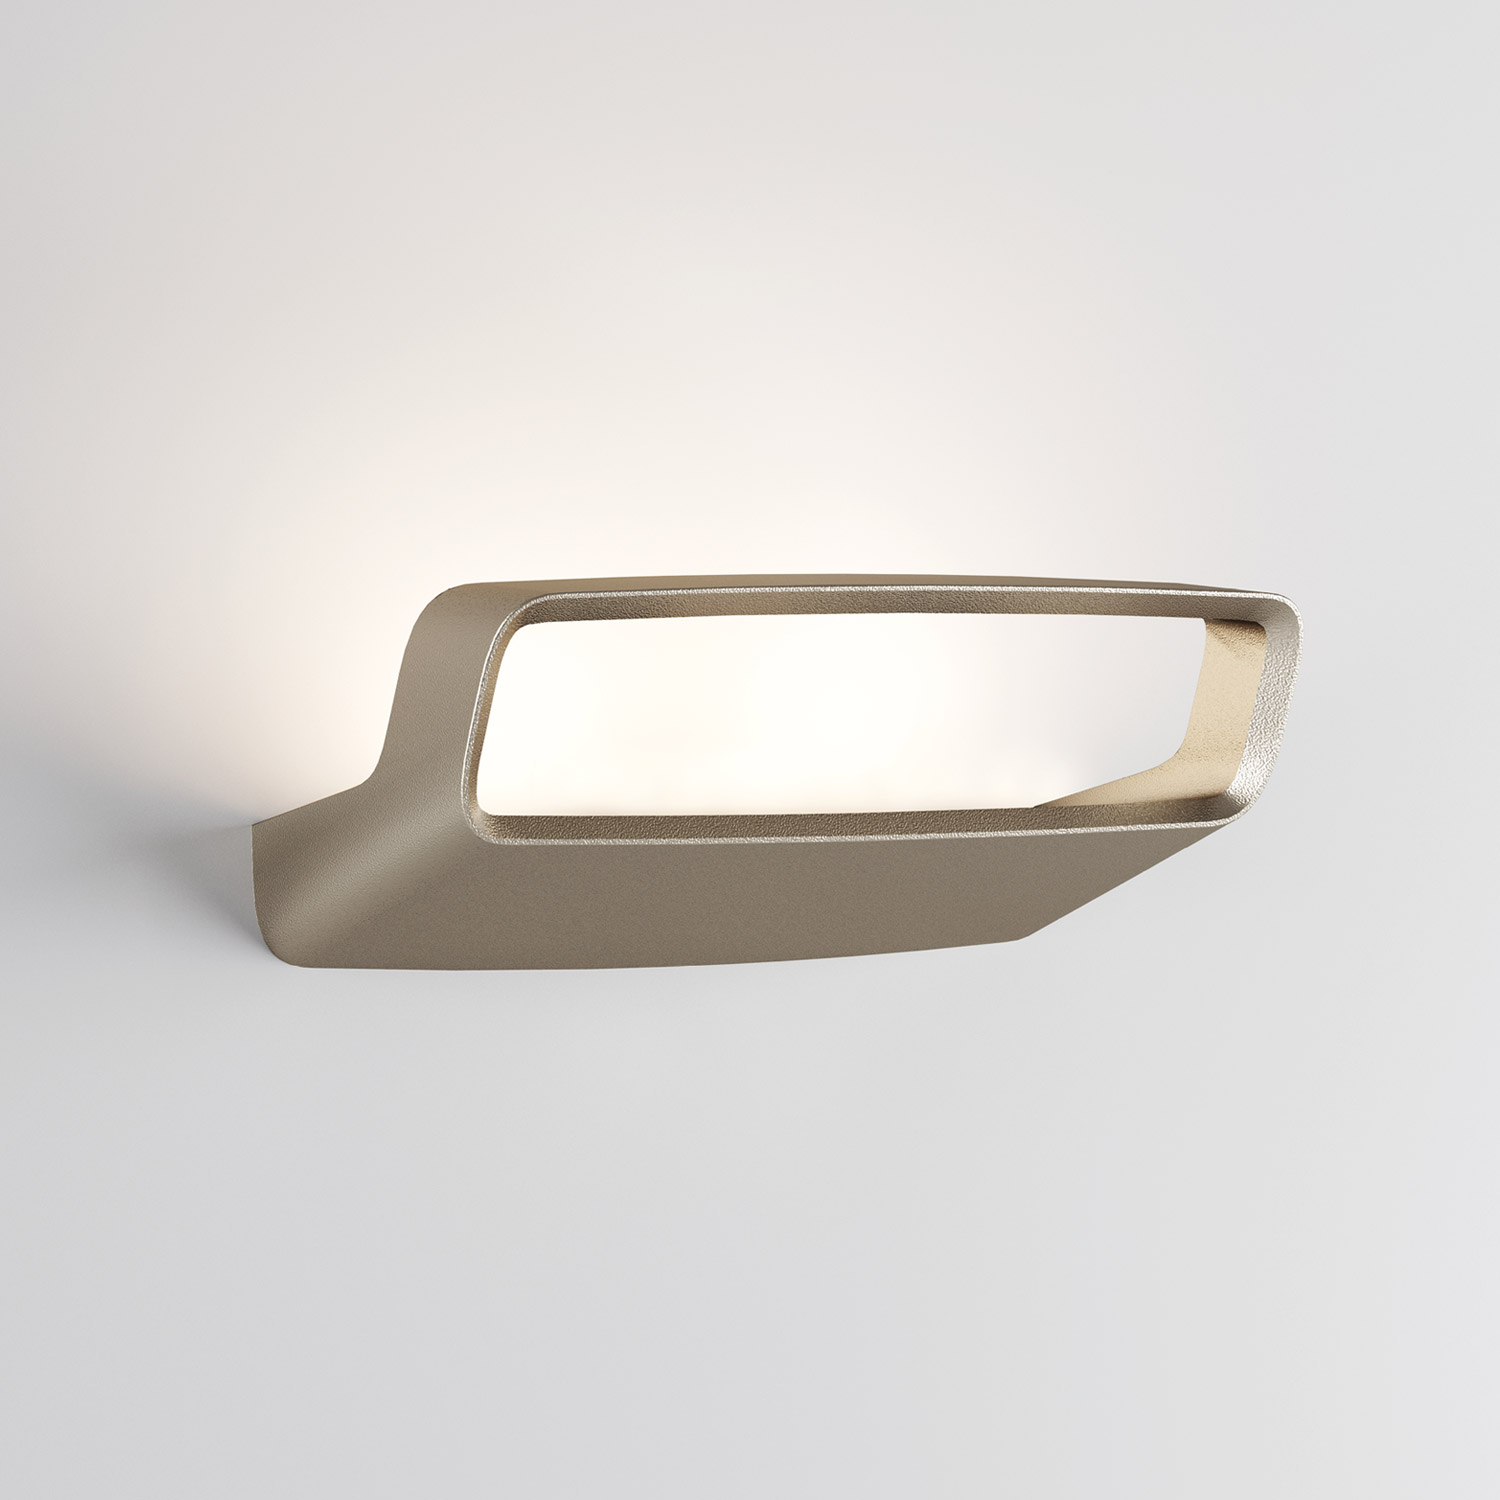 Aile LED wall light by Lodes